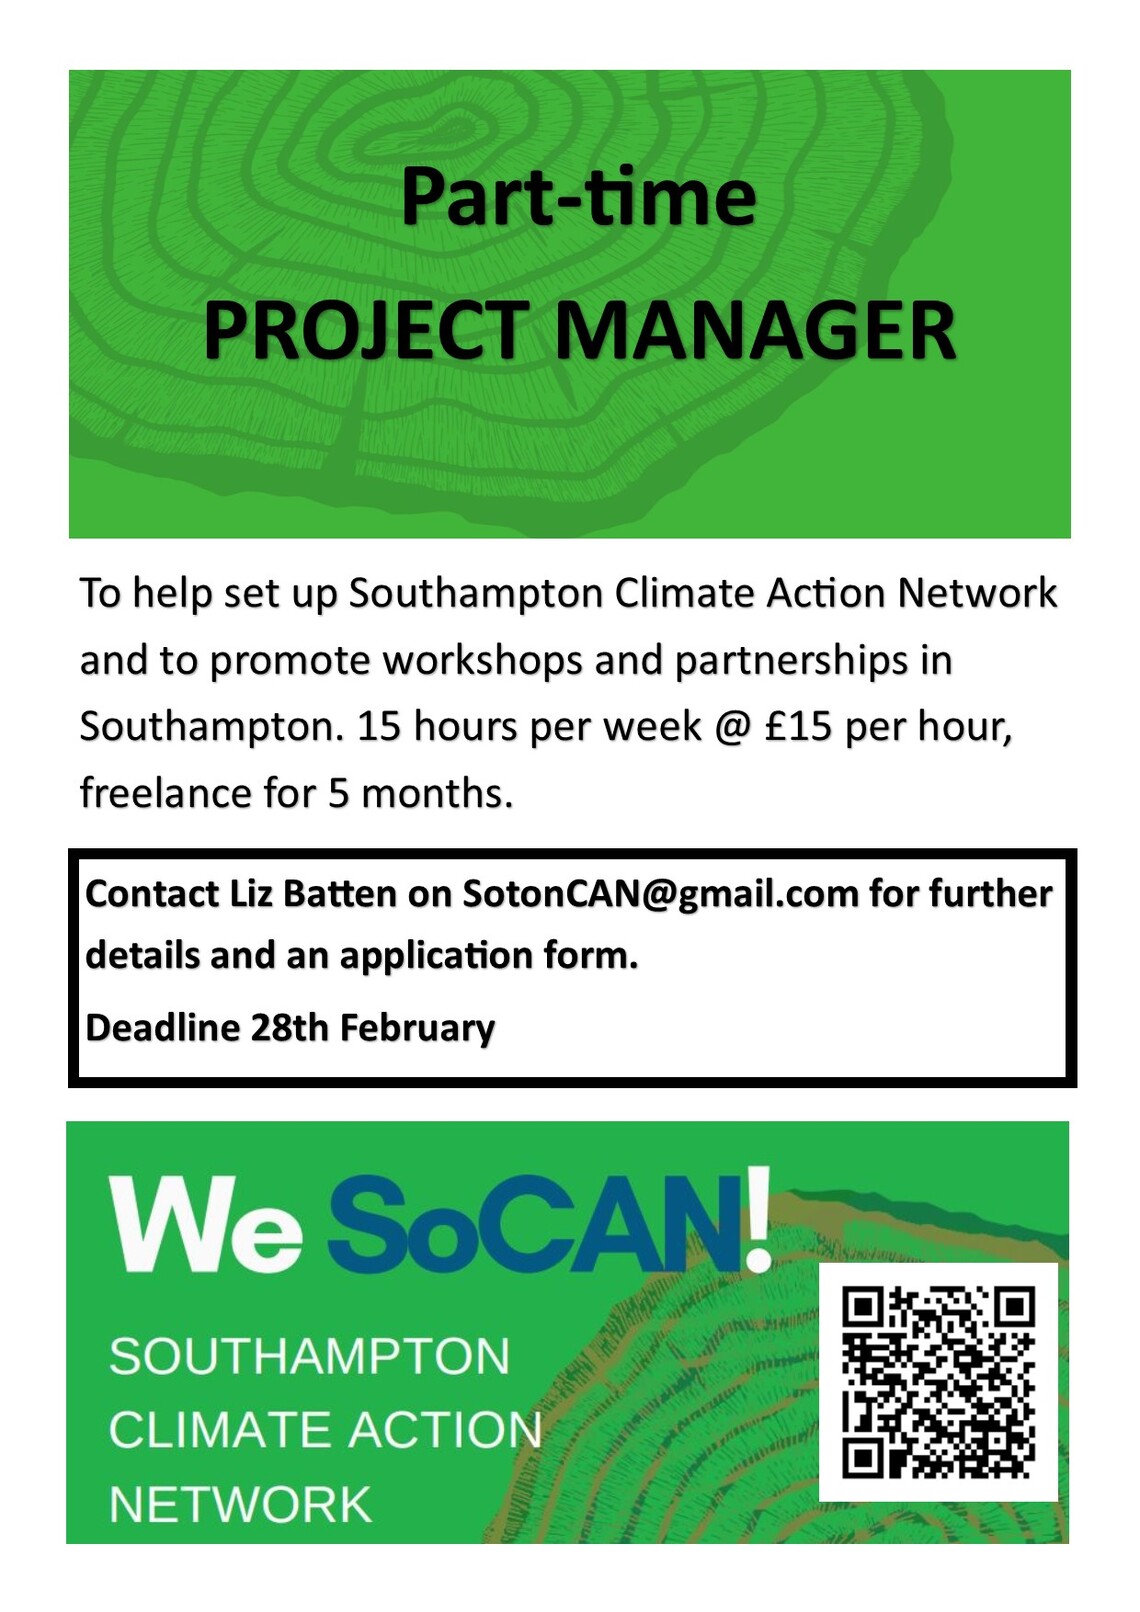 Part-time project manager wanted